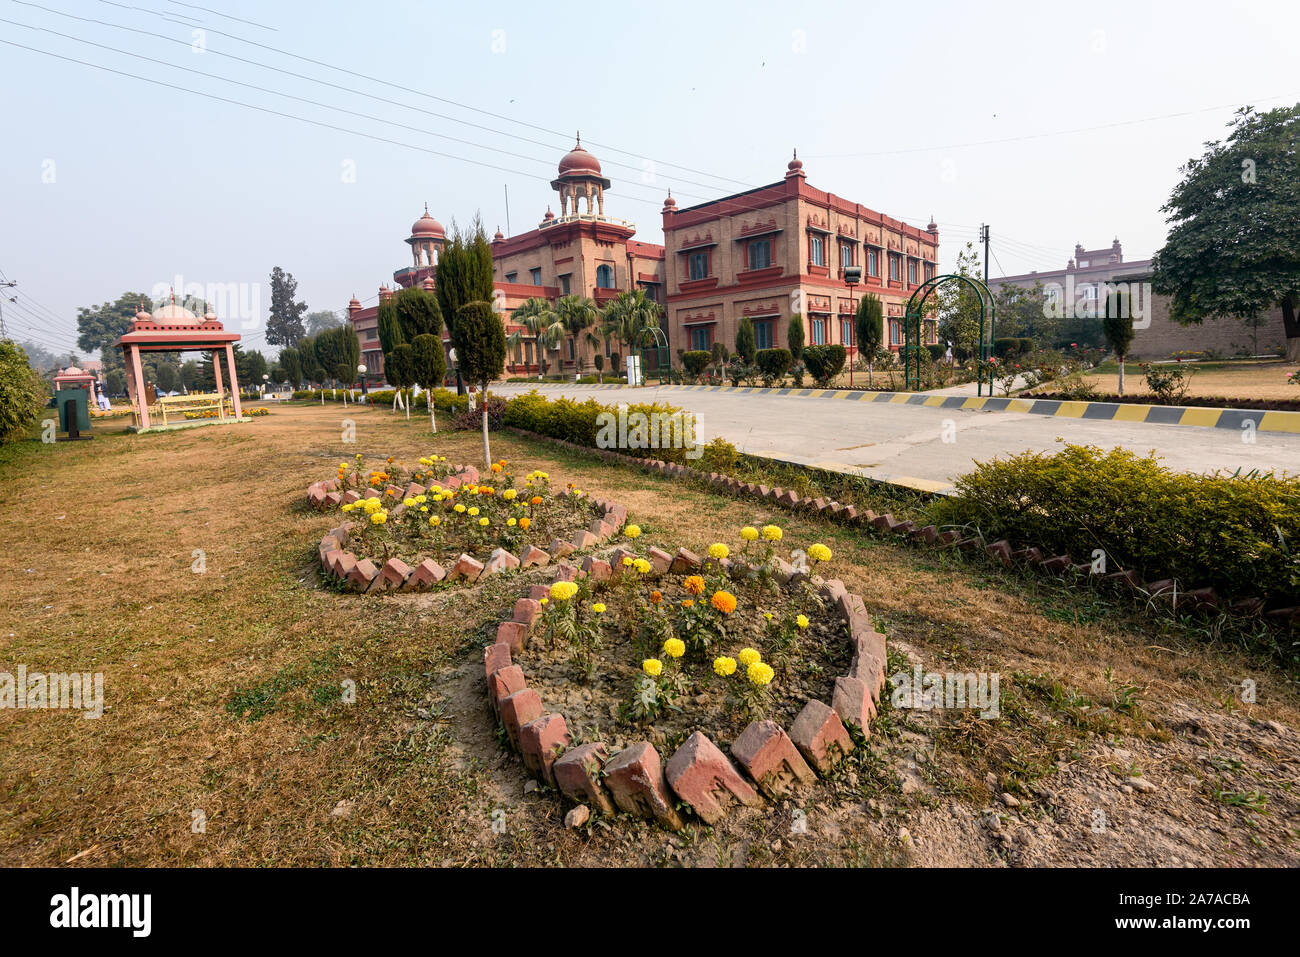 Peshawar museum building was built in a syncretic architectural style consisting of British, Hindu, Buddhist and Mughal Islamic styles. Stock Photo